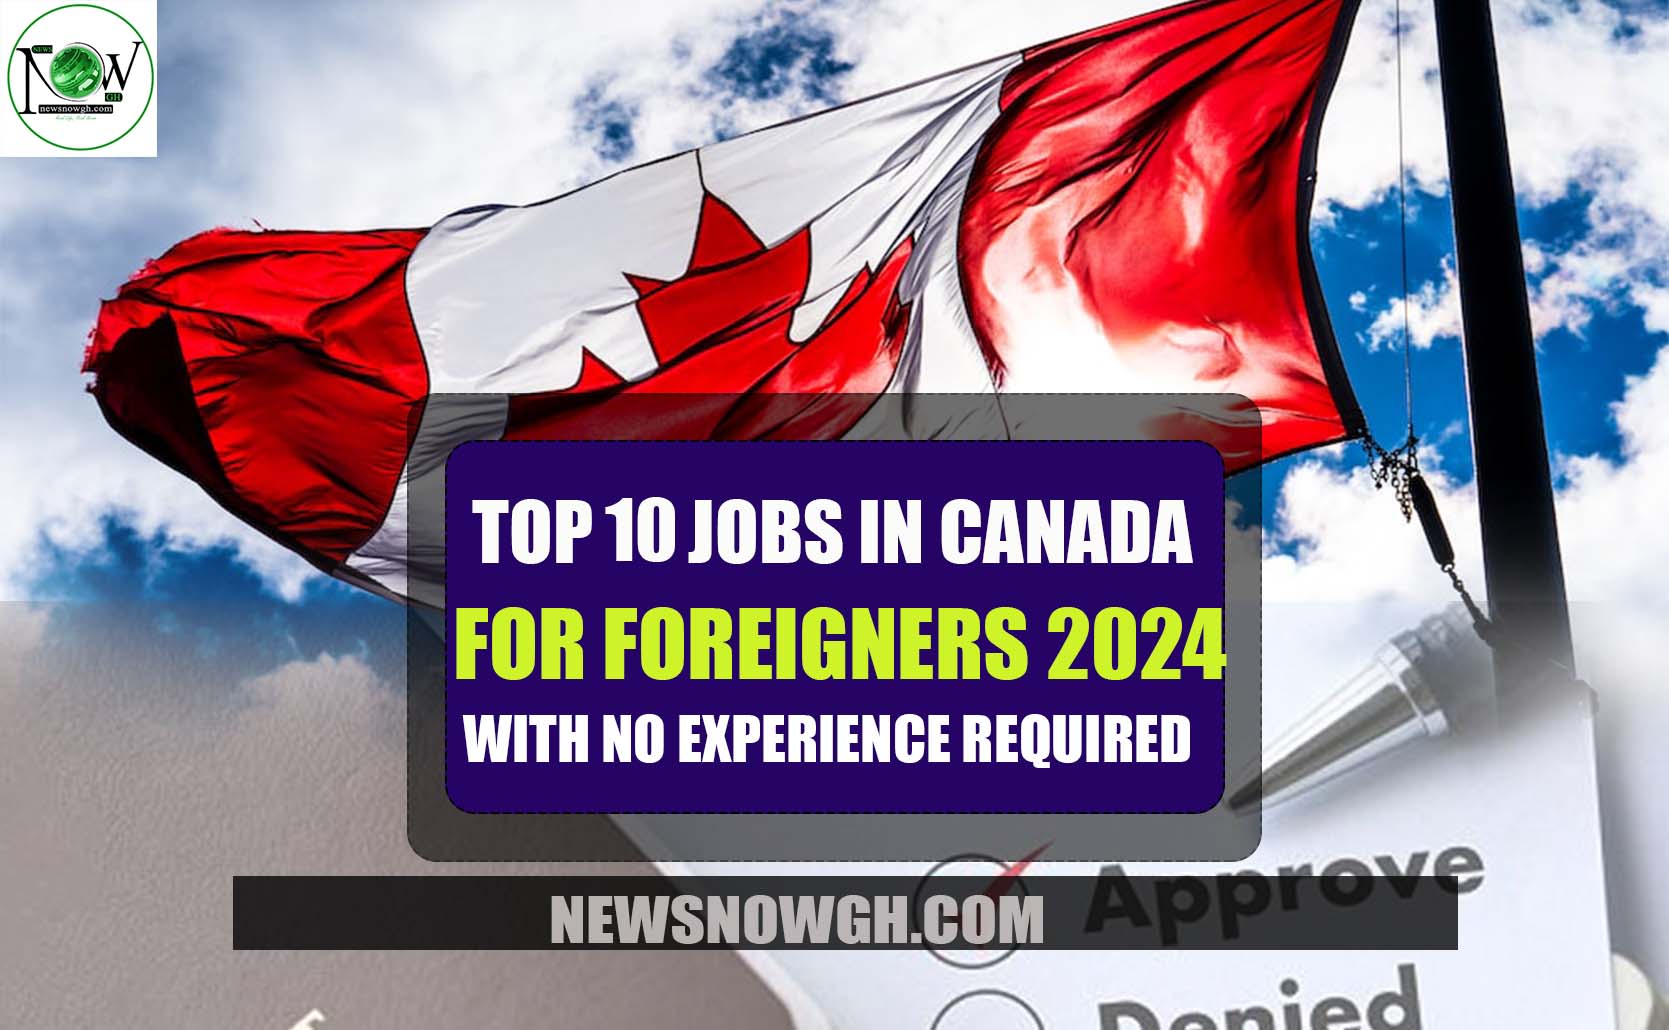 Top 10 Jobs in Canada for Foreigners 2024 With No Experience Required